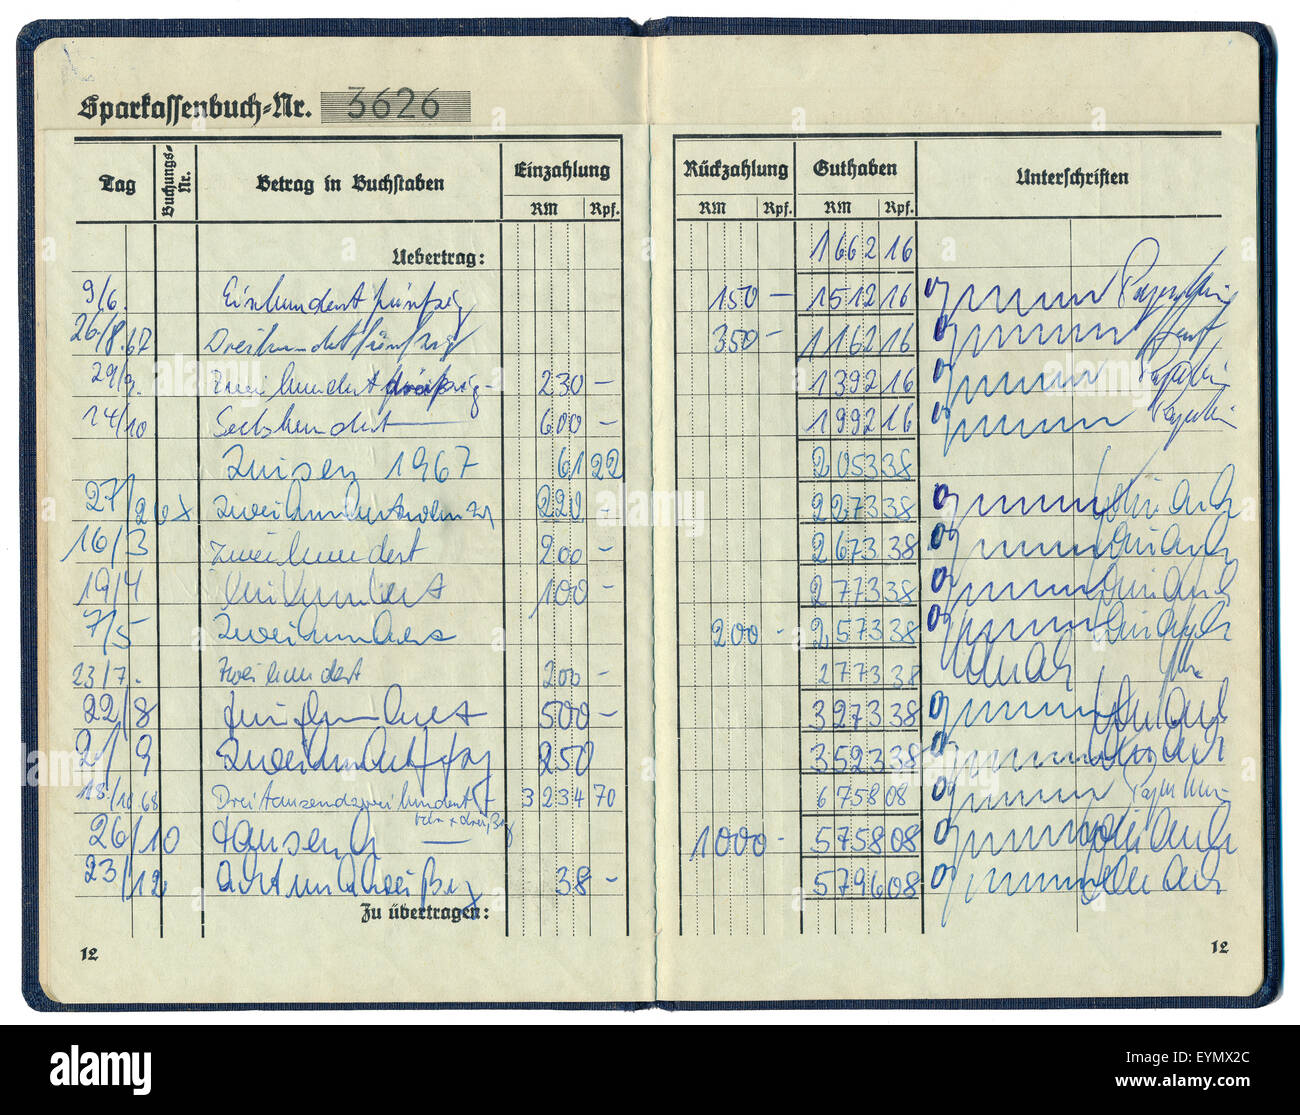 Old savings account passbook from 1967 to 1968, German Sparkasse bank, recording of entries and signatures, Germany, Europe Stock Photo